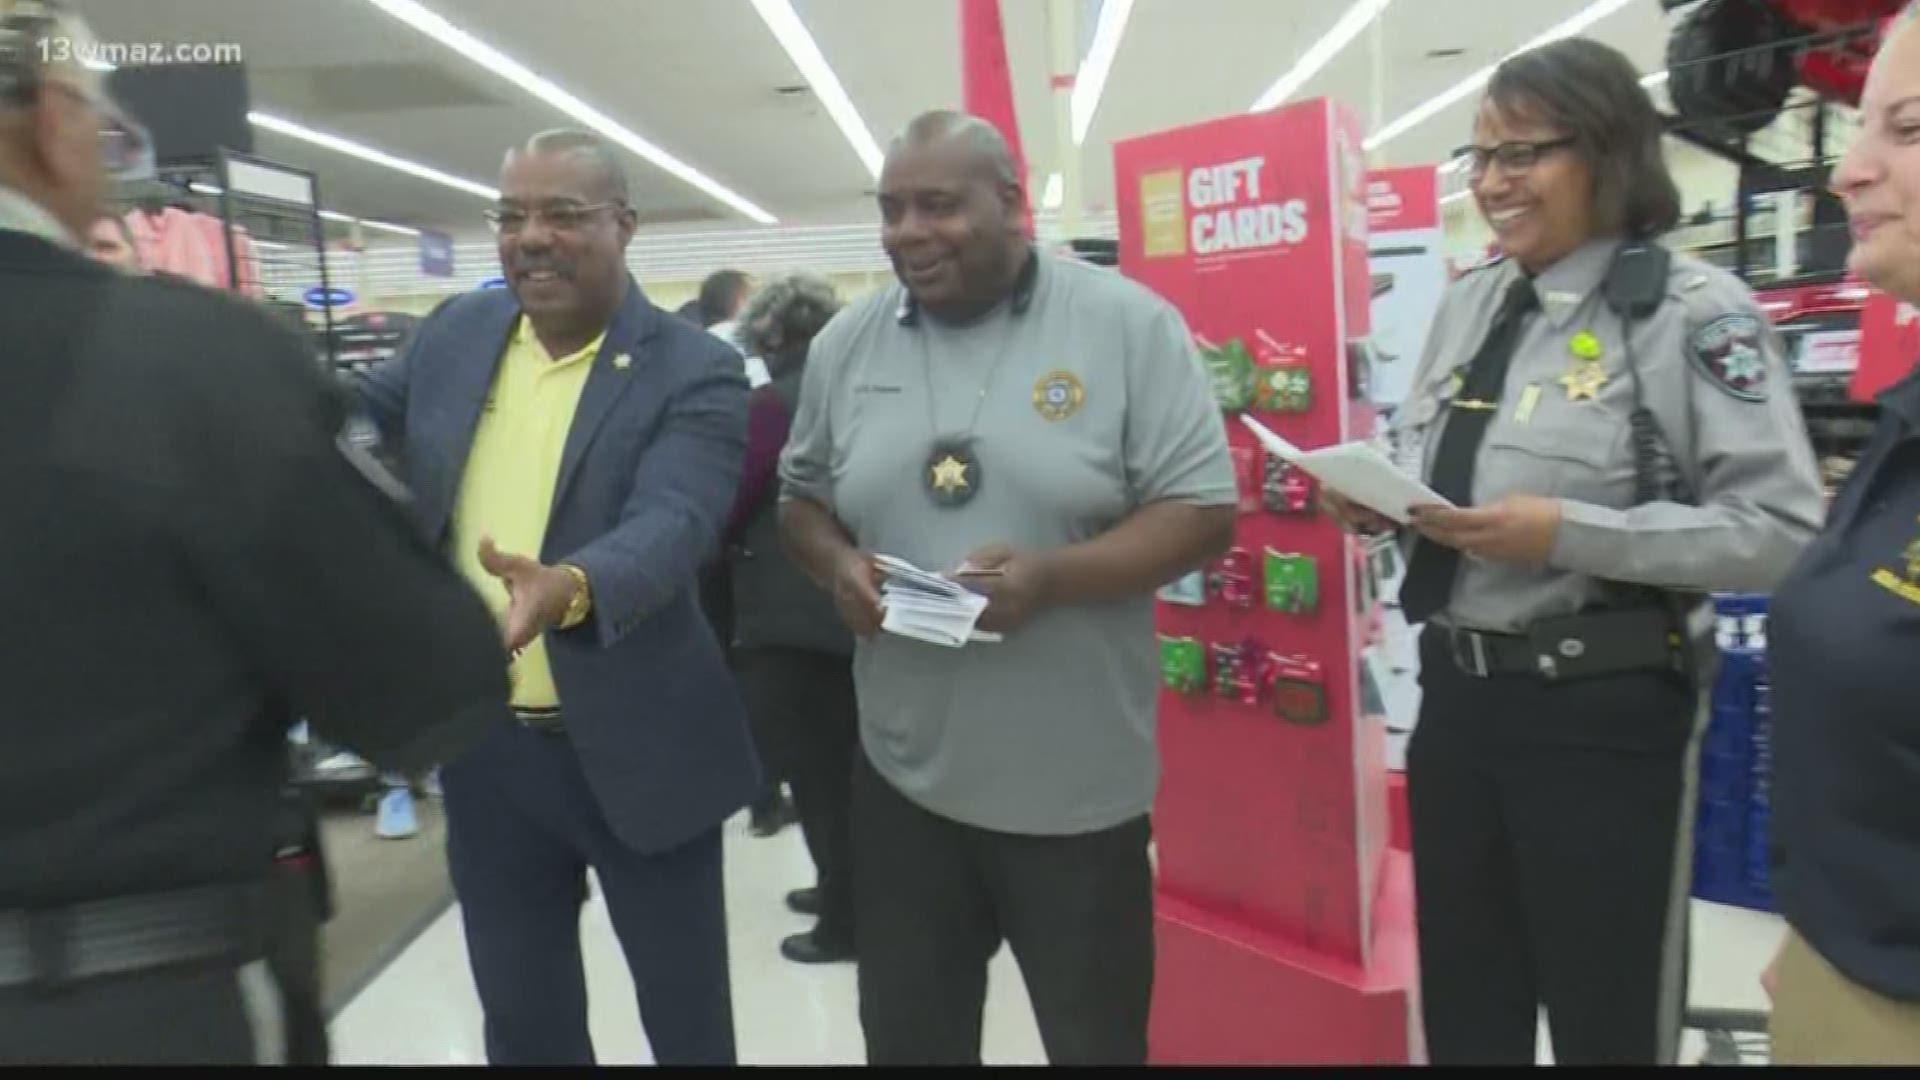 Academy Sports and Outdoors partnered with the Bibb County Sheriff's Office to bring 18 local first responders and their families on a special holiday shopping spree